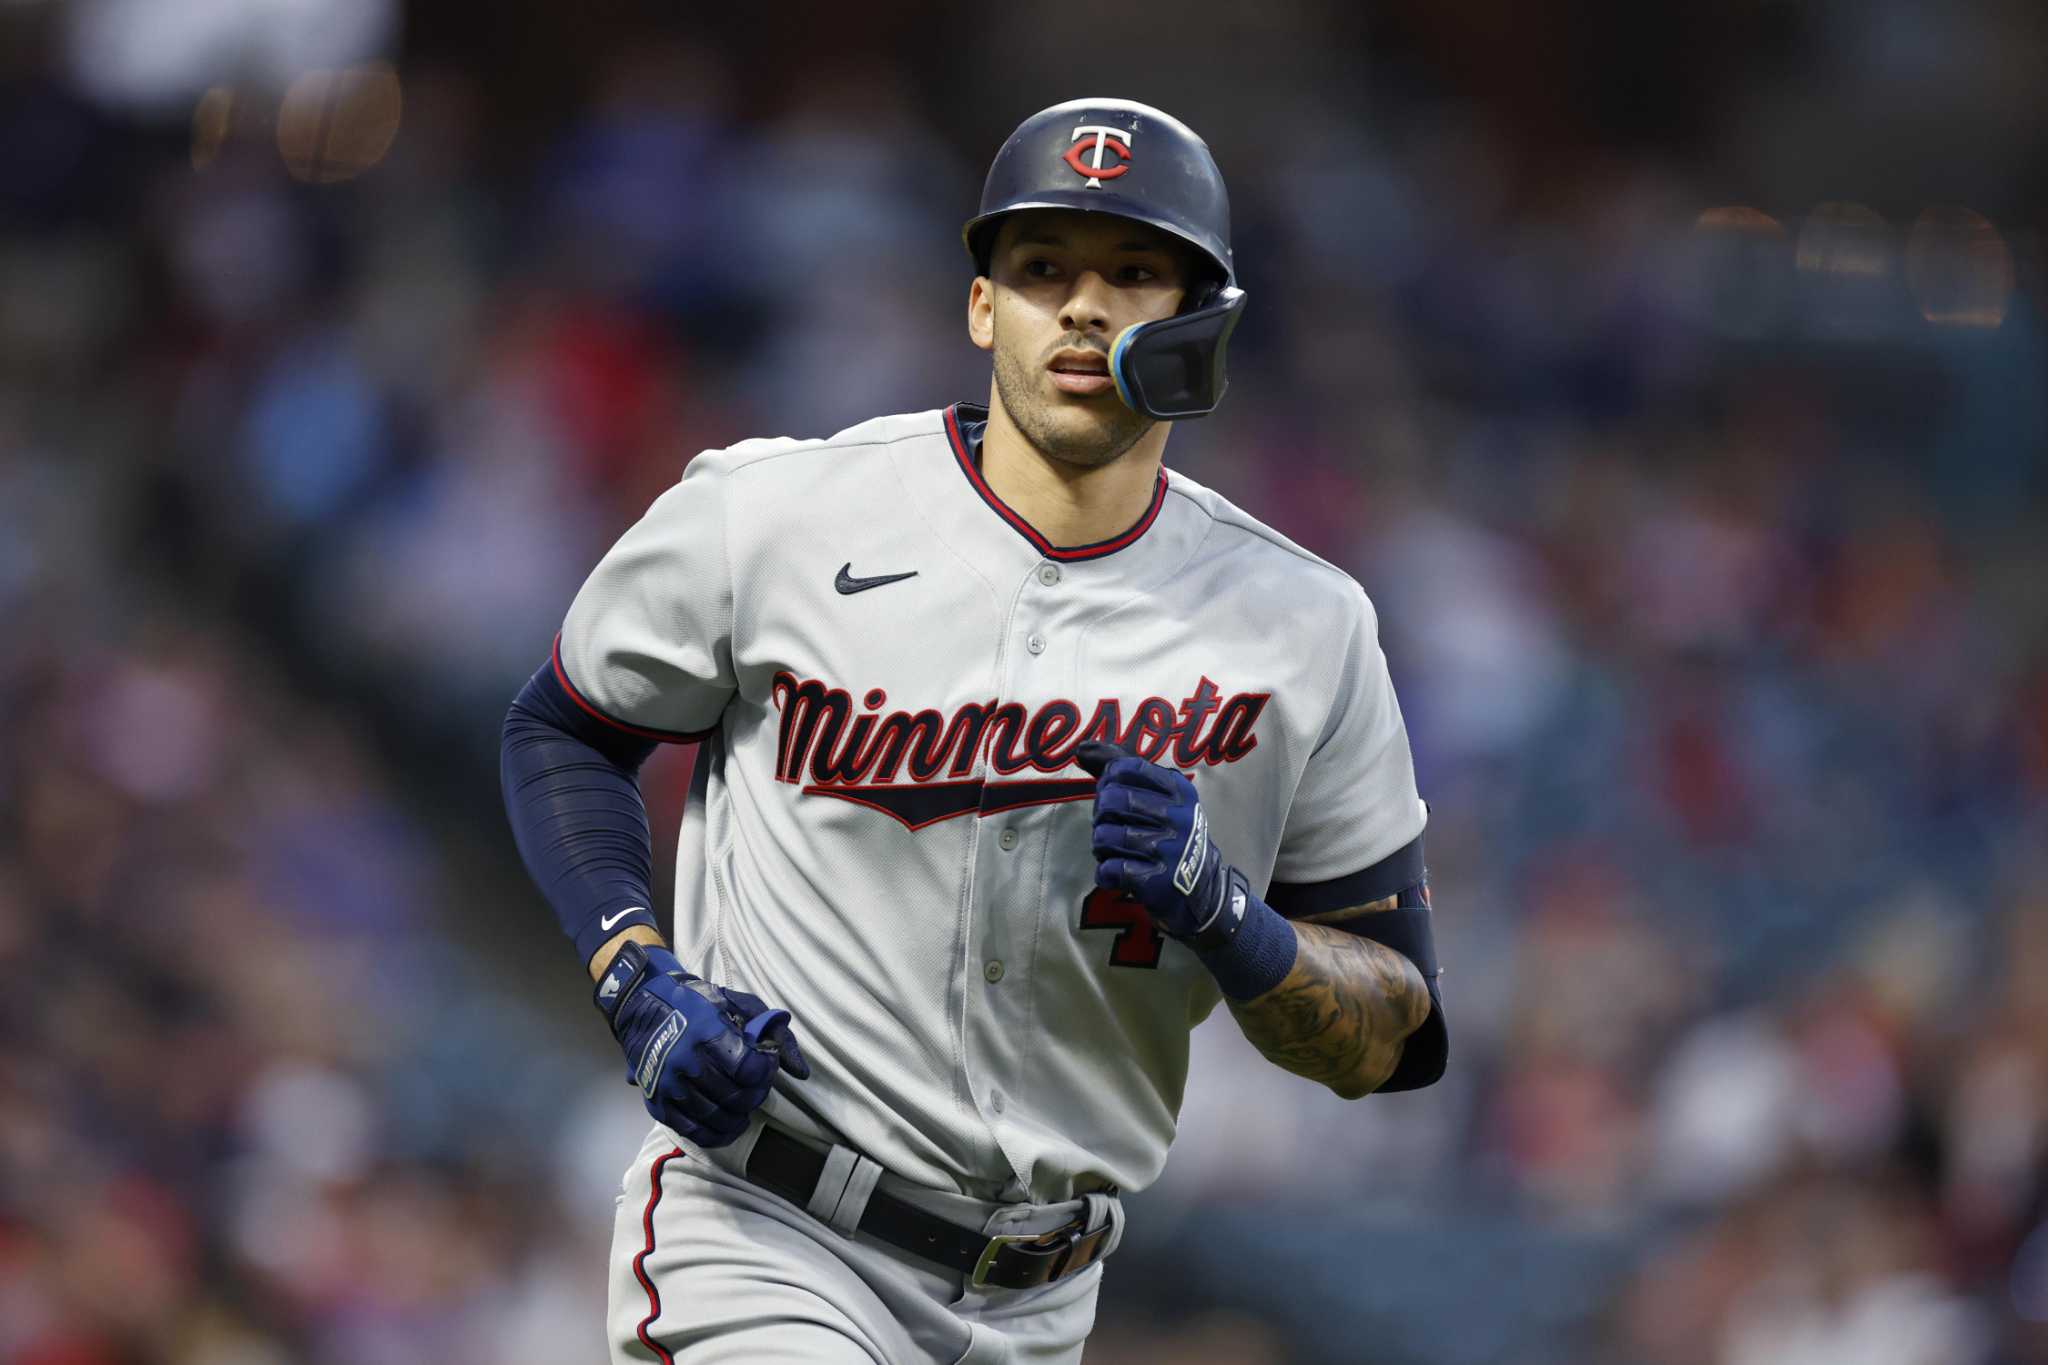 Why Trea Turner, not Aaron Judge, should be Giants' top free-agent